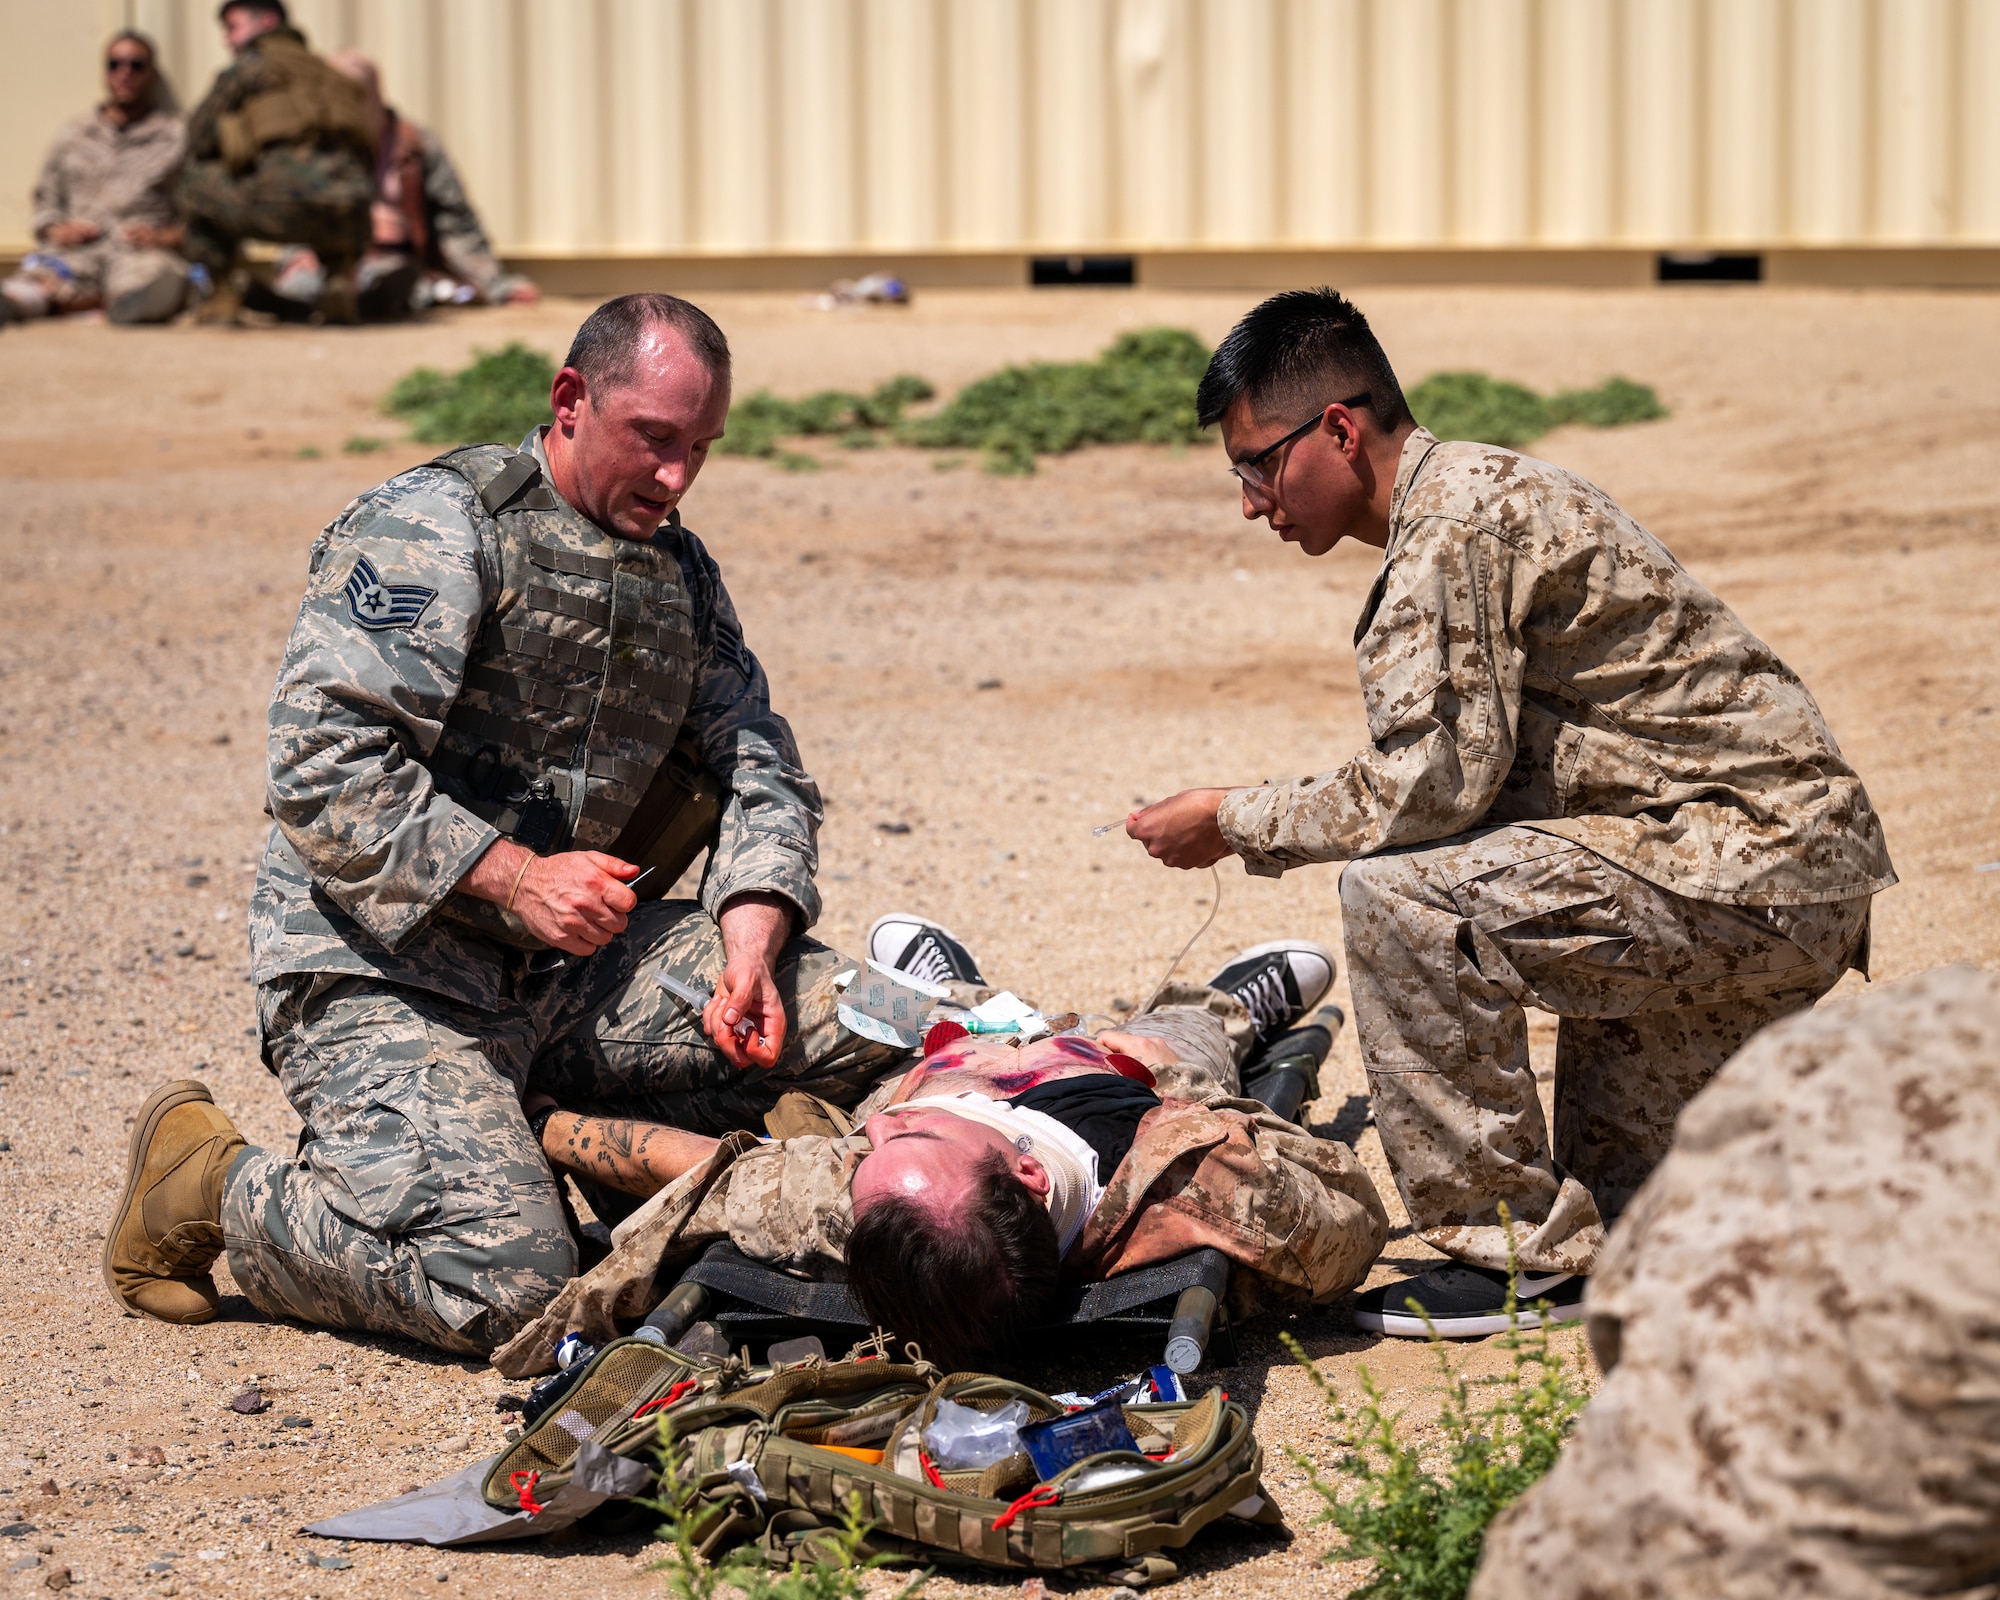 U.S. Air Force 1st Lt. Shane Mikolajewki, 81st Medical Group healthcare specialist, performs simulated Tactical Combat Casualty Care during an exercise April 26, 2023, at Luke Air Force Base, Arizona.